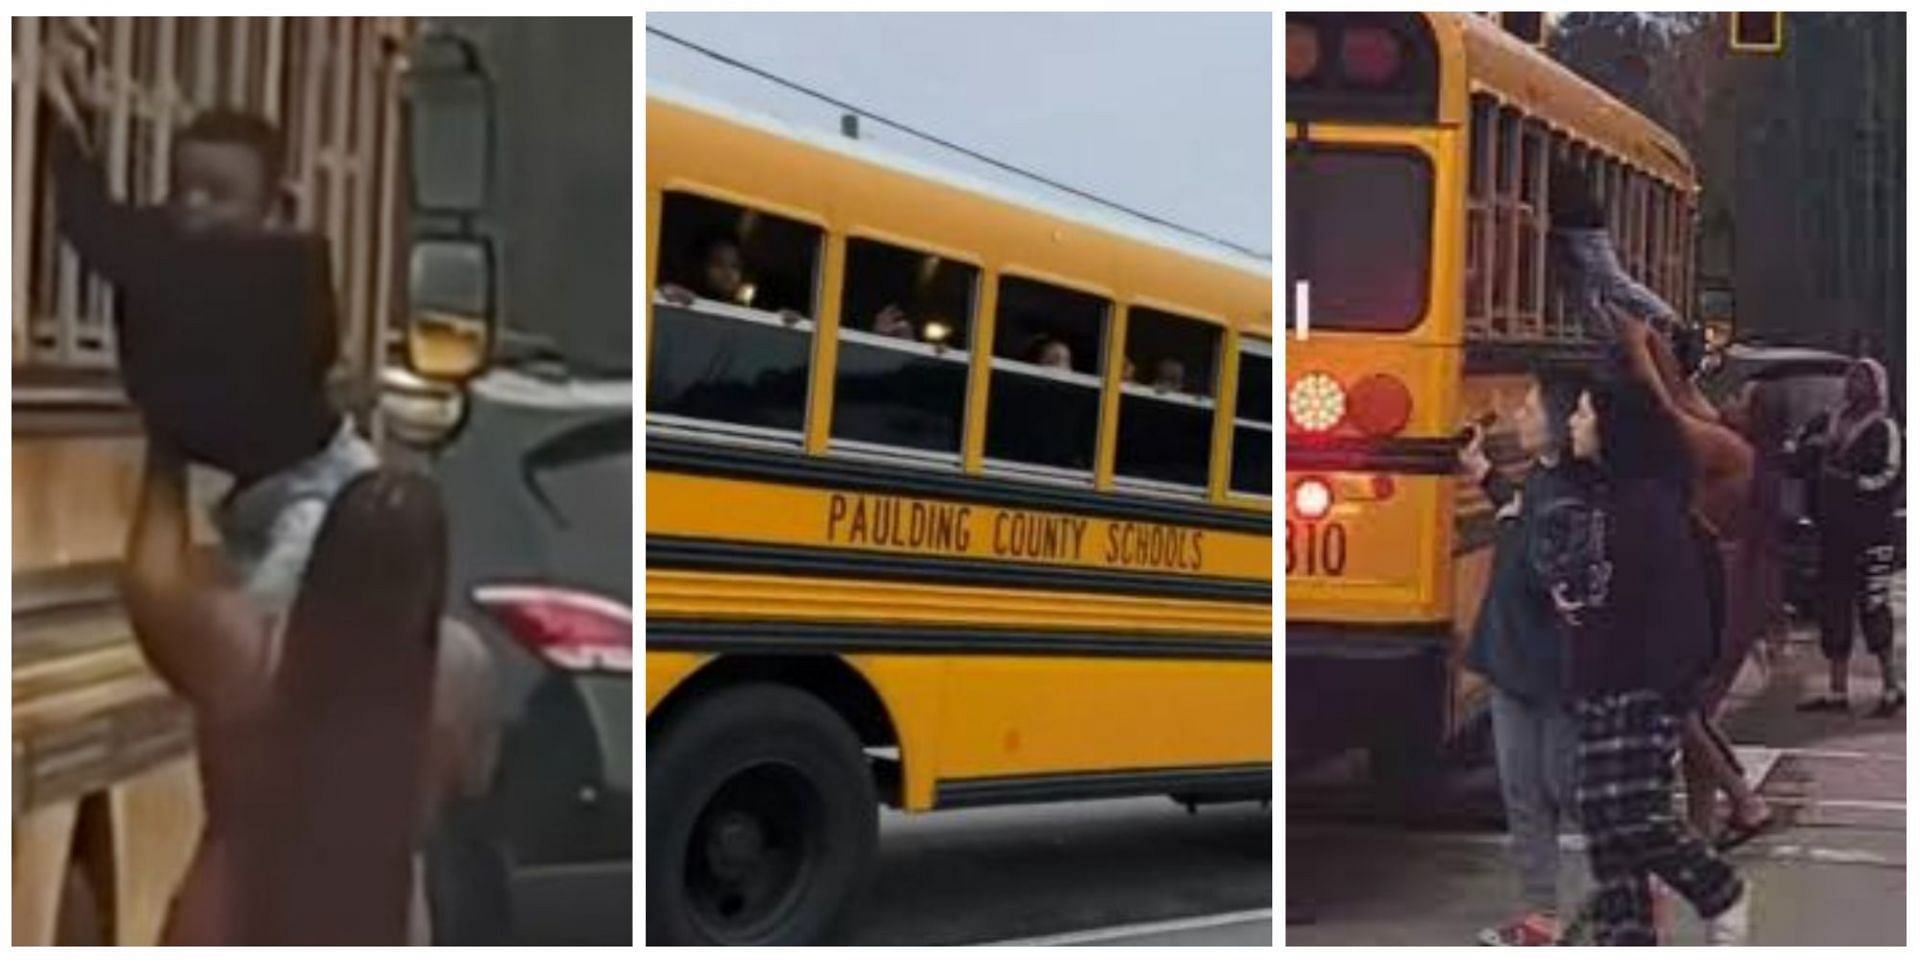 What did the Paulding County School driver do? More details about the incident revealed. (Image via Paulding County School)